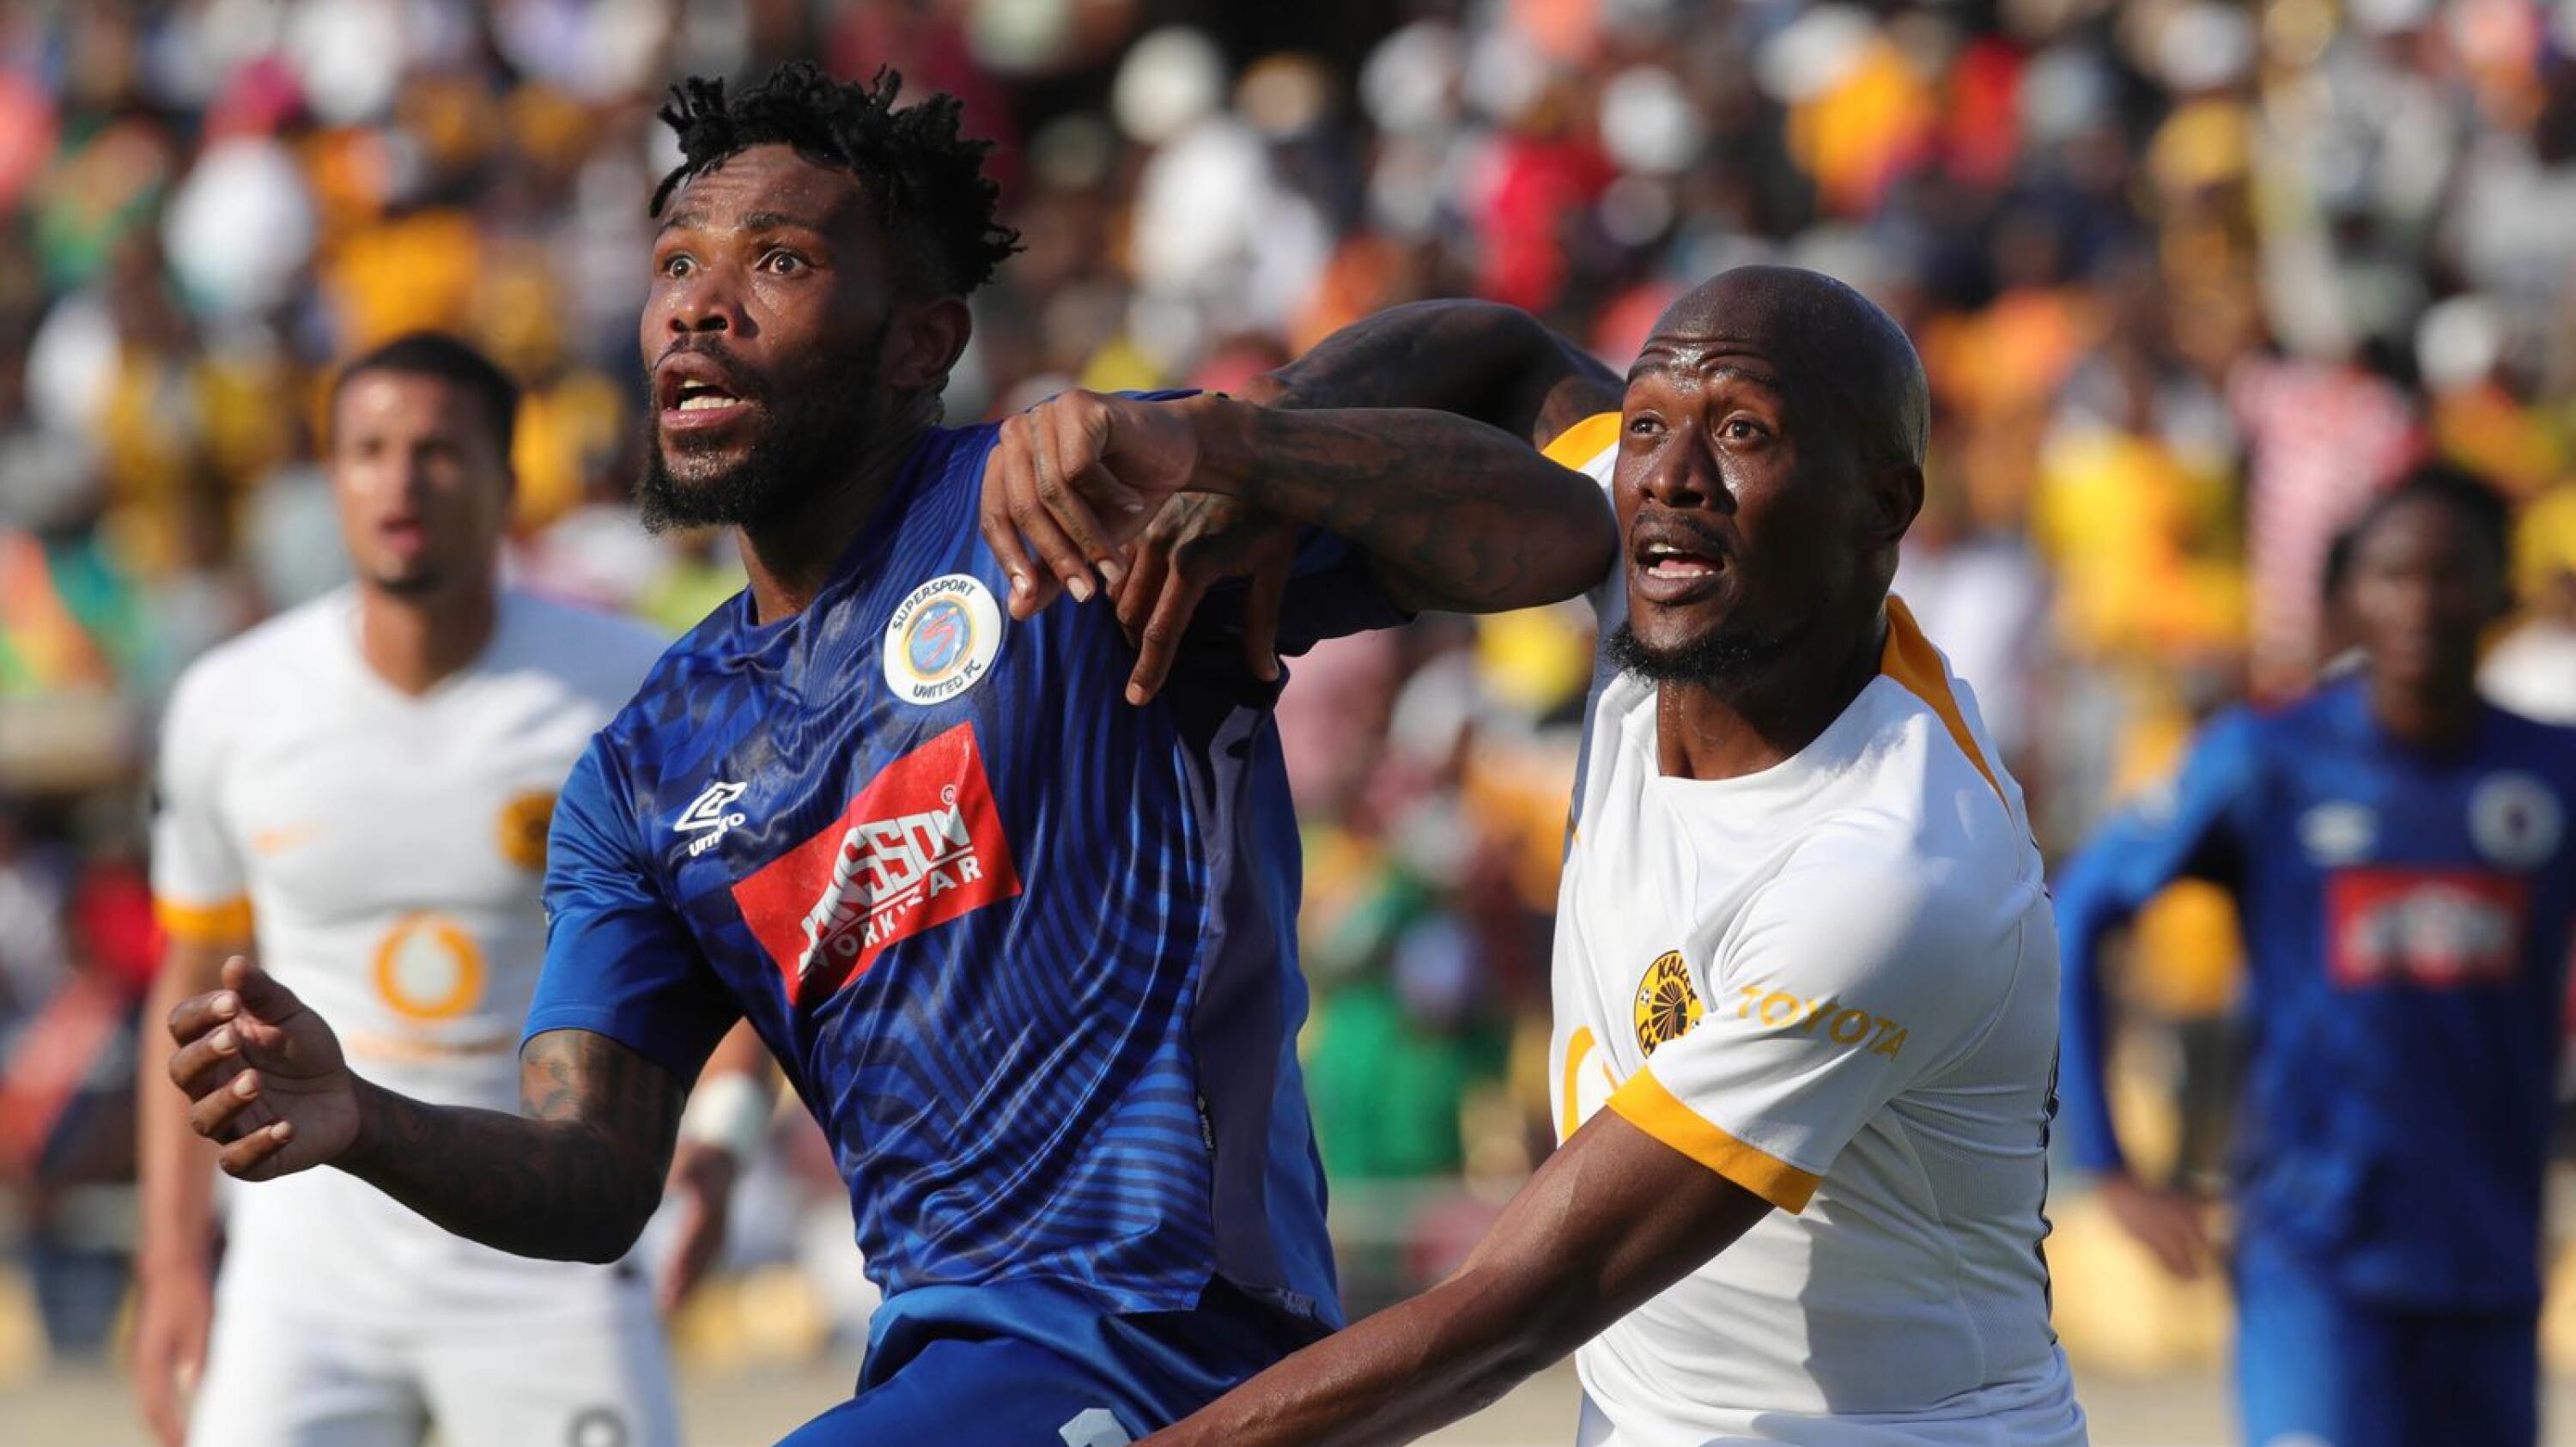 Thulani Hlatshwayo of Supersport United and Sfiso Hlanti of Kaizer Chiefs fight for the ball during their DStv Premiership match at Royal Bafokeng Stadium in Rustenburg on Saturday